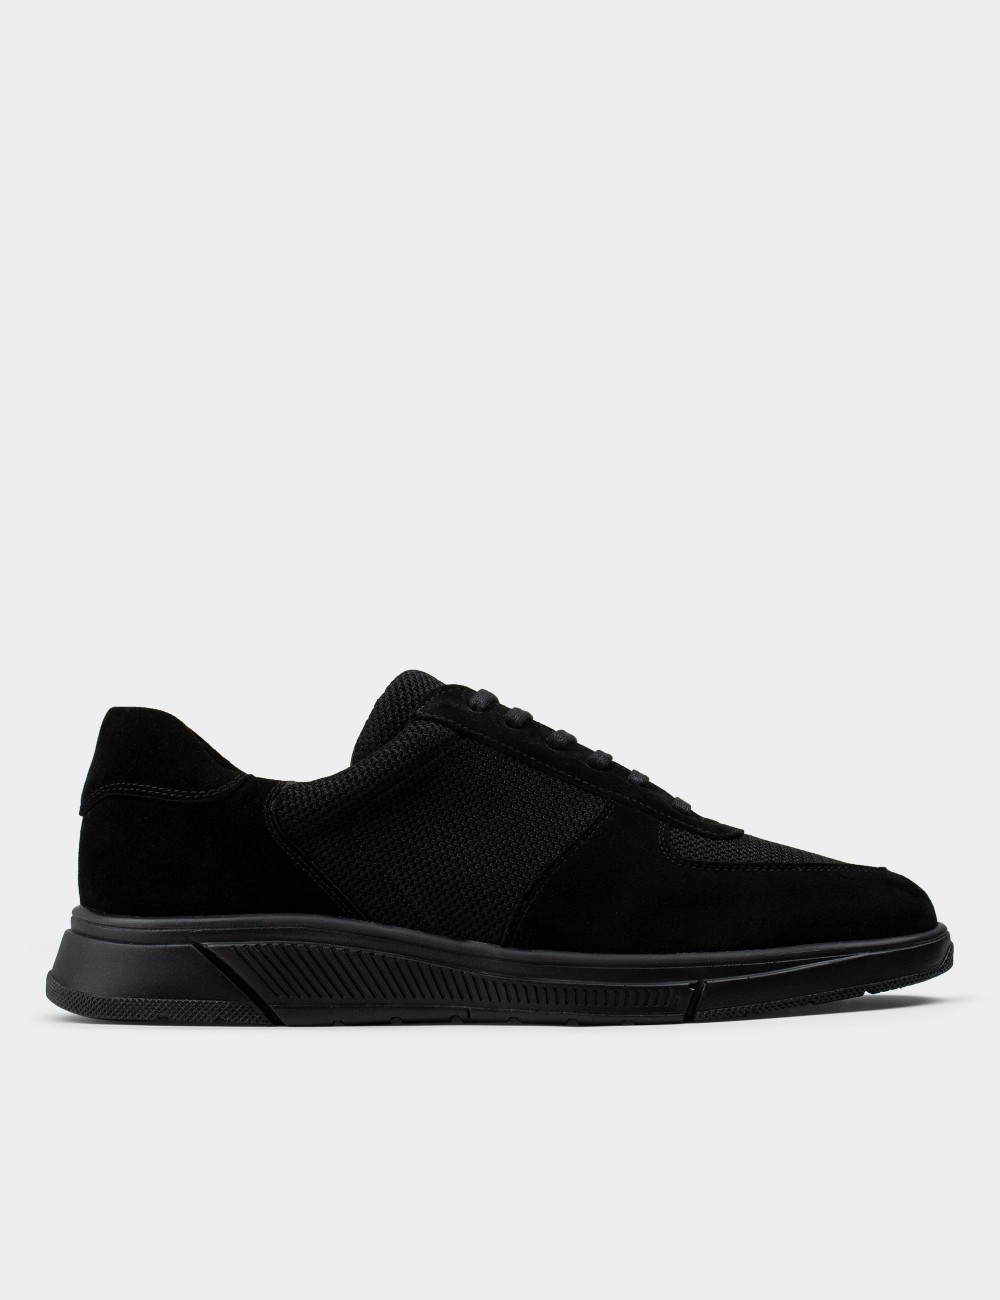 Black Suede Leather Sneakers - 01860MSYHC01